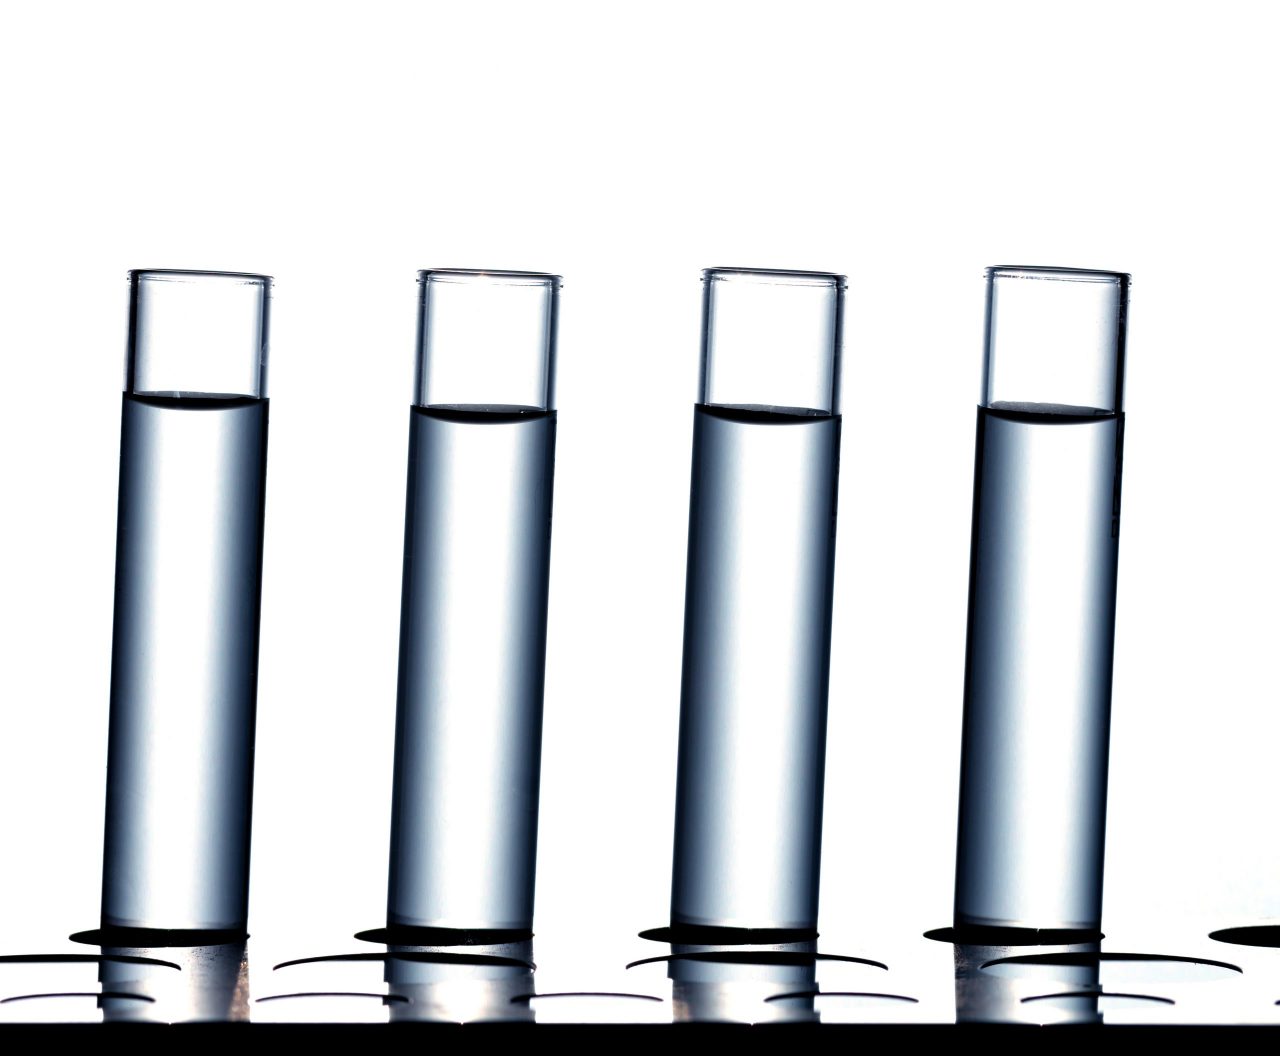 science-laboratory-research-test-tubes-976HDW9-scaled-1280x1056.jpg